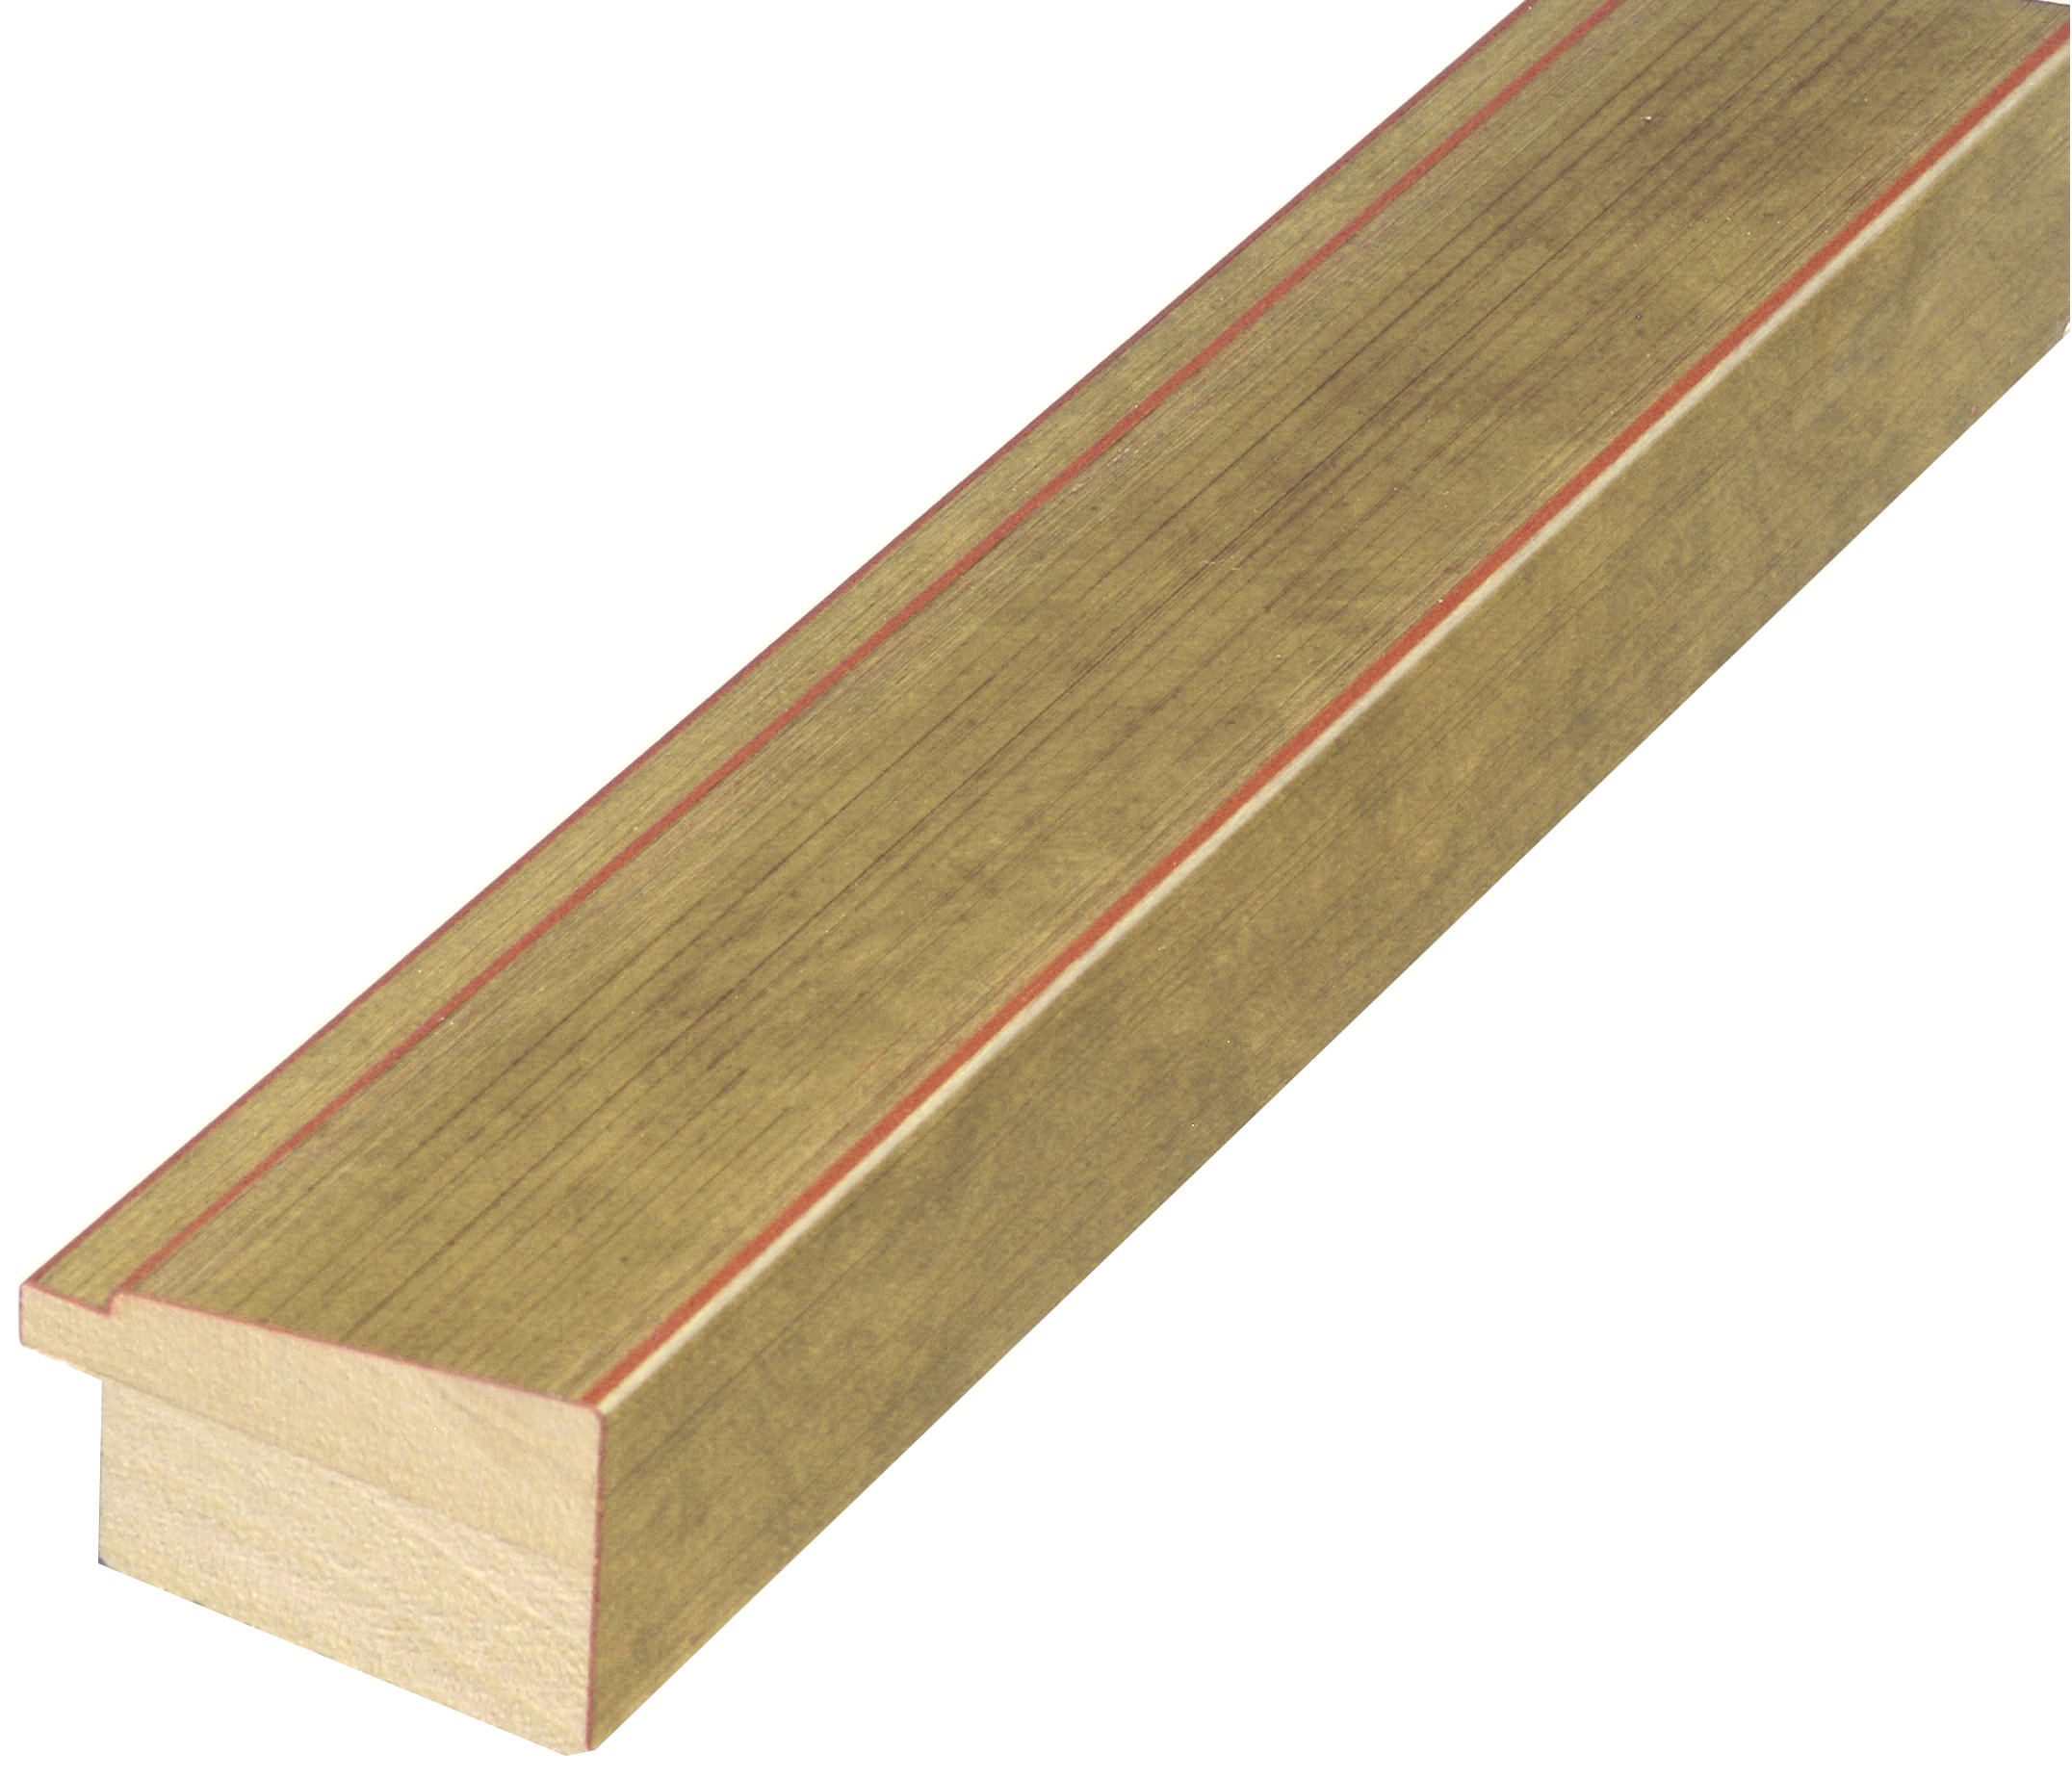 Moulding finger-jointed pine - width 42mm height 27 - gold finish